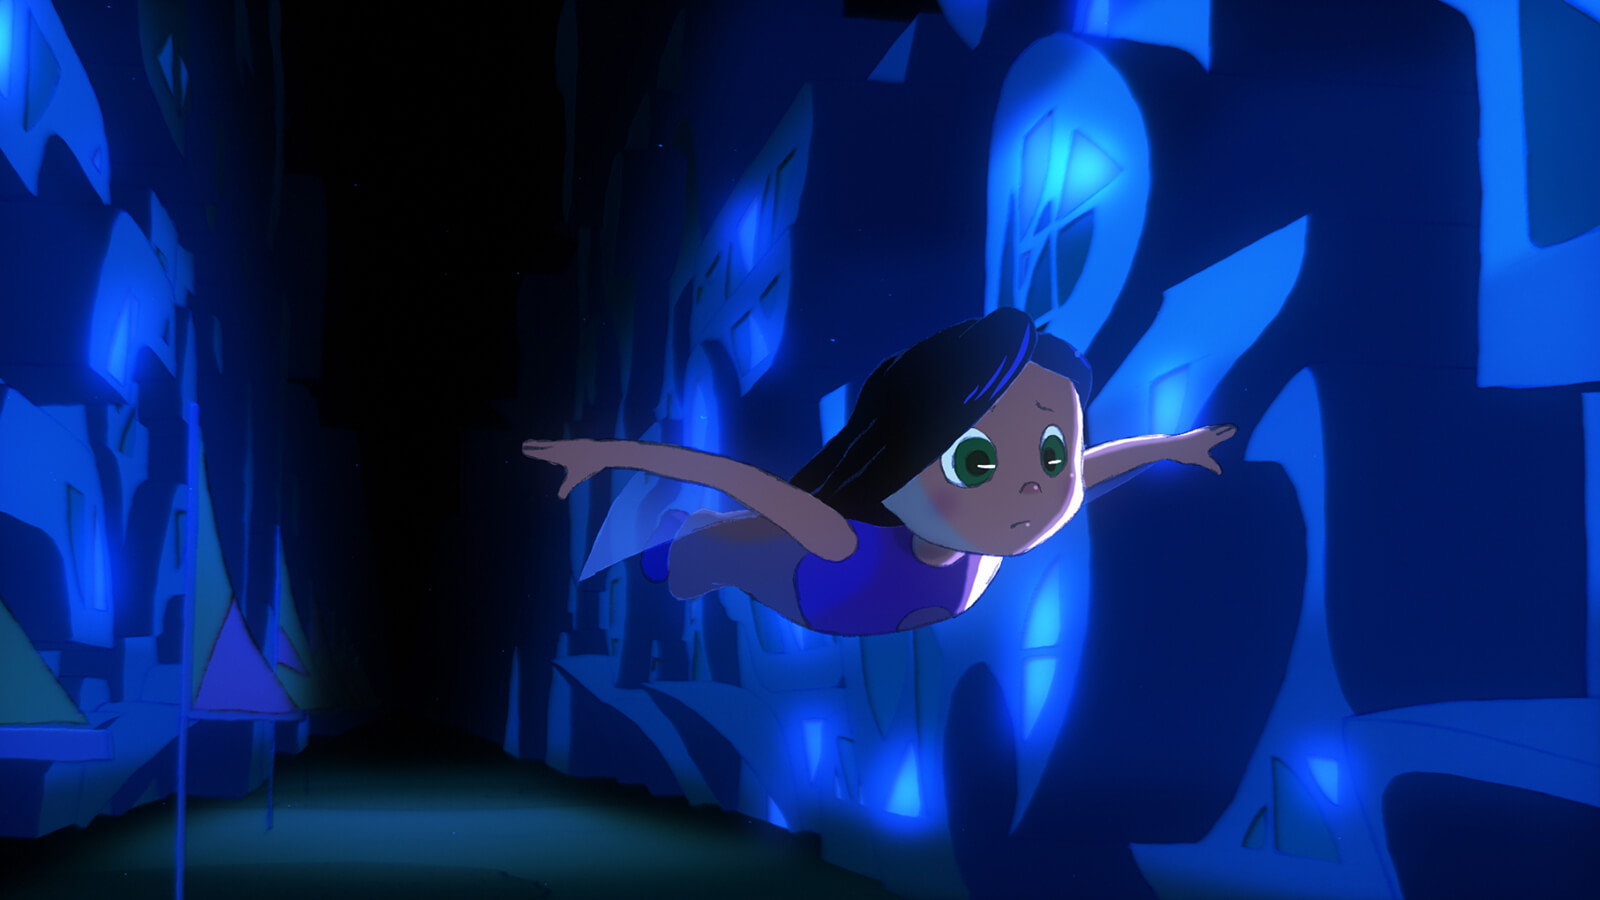 Closeup up a young girl with green eyes swimming underwater between a canyon of glowing, dark-blue shapes